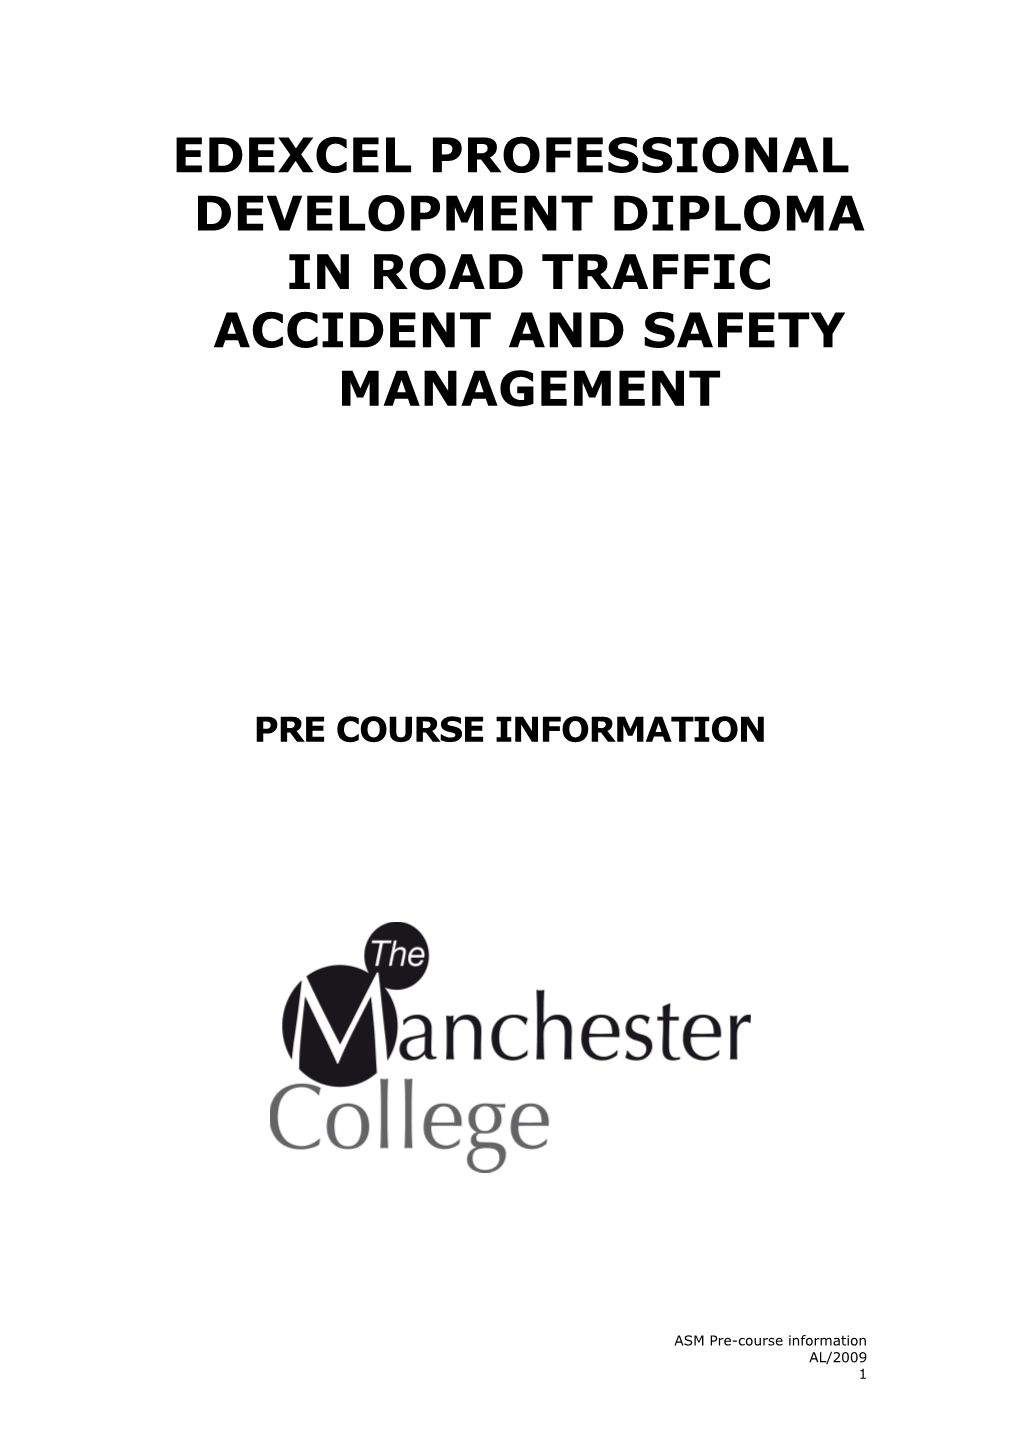 Edexcel Professional Development Diploma in Road Traffic Accident and Safety Management